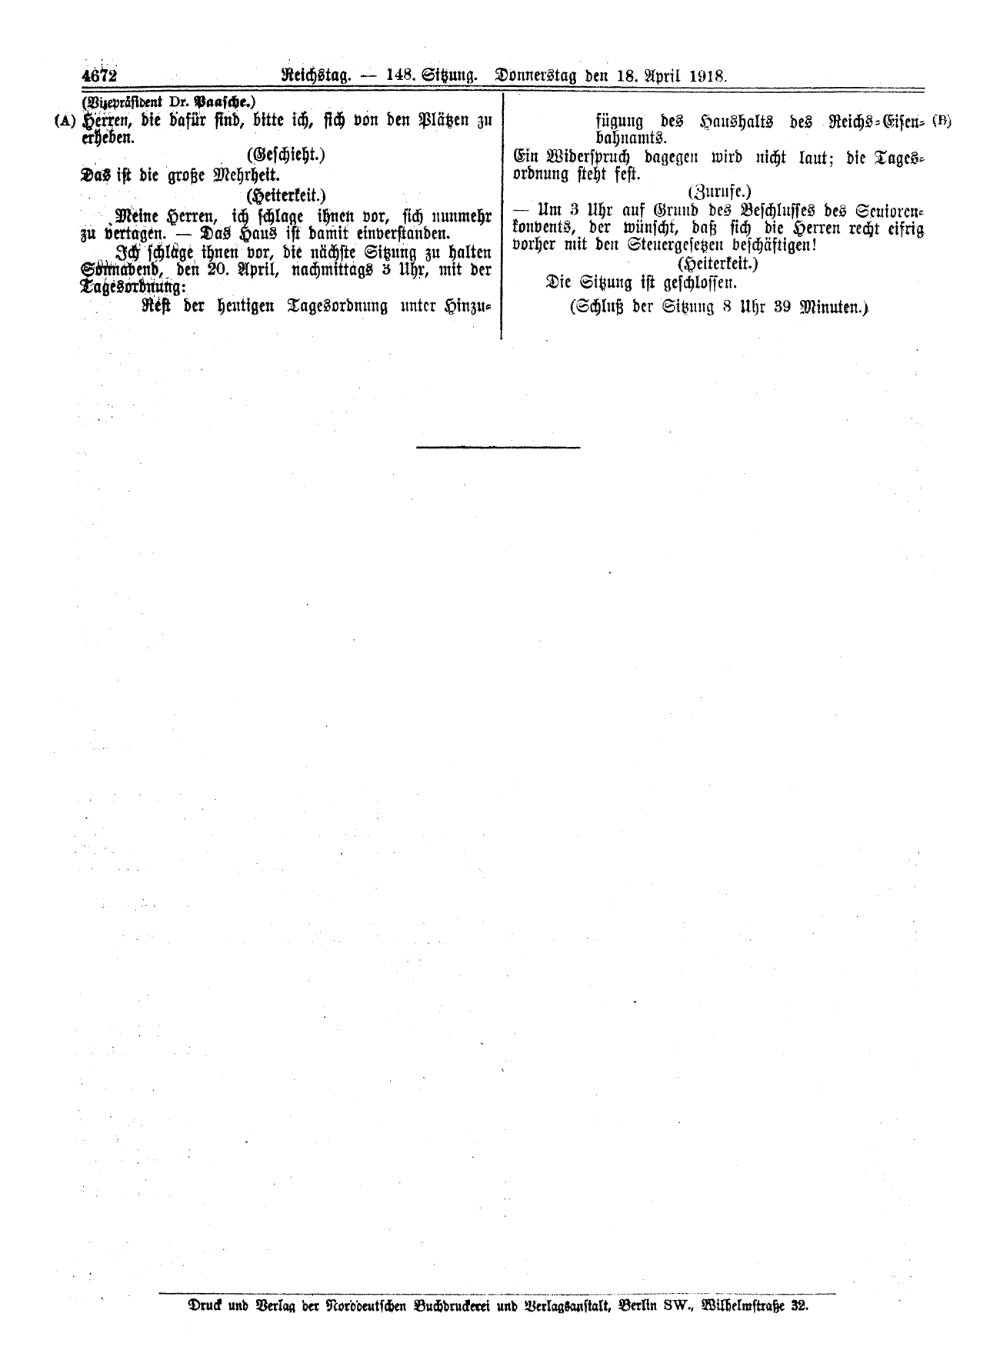 Scan of page 4672